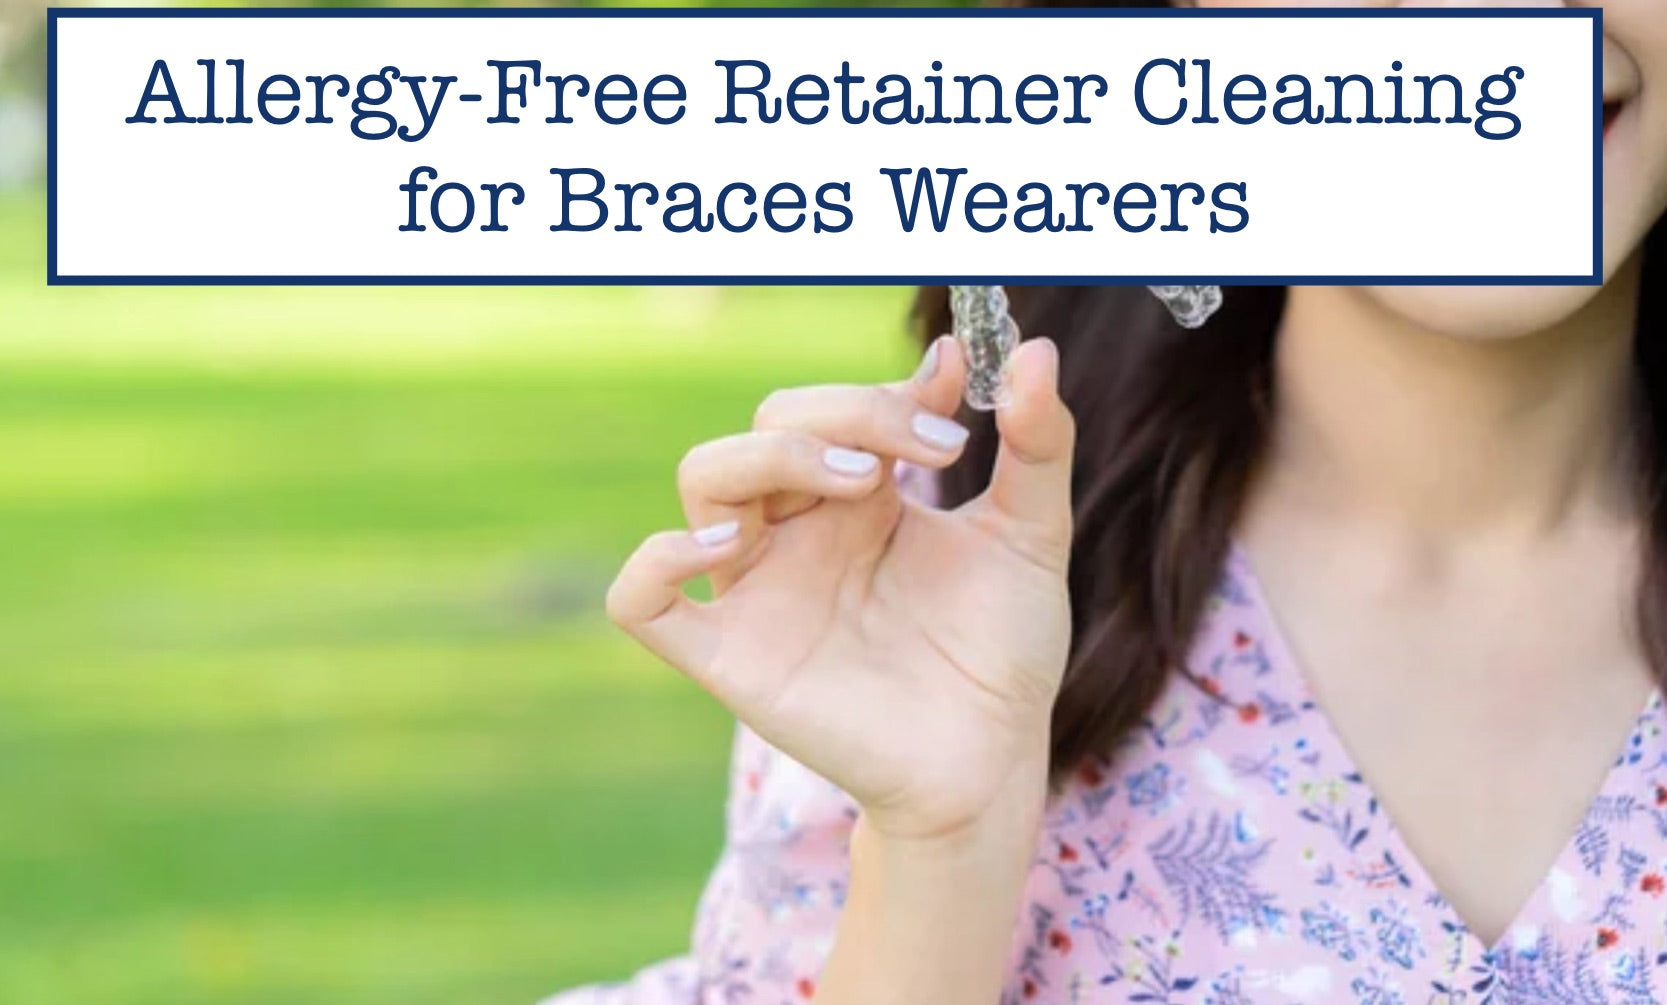 Allergy-Free Retainer Cleaning for Braces Wearers